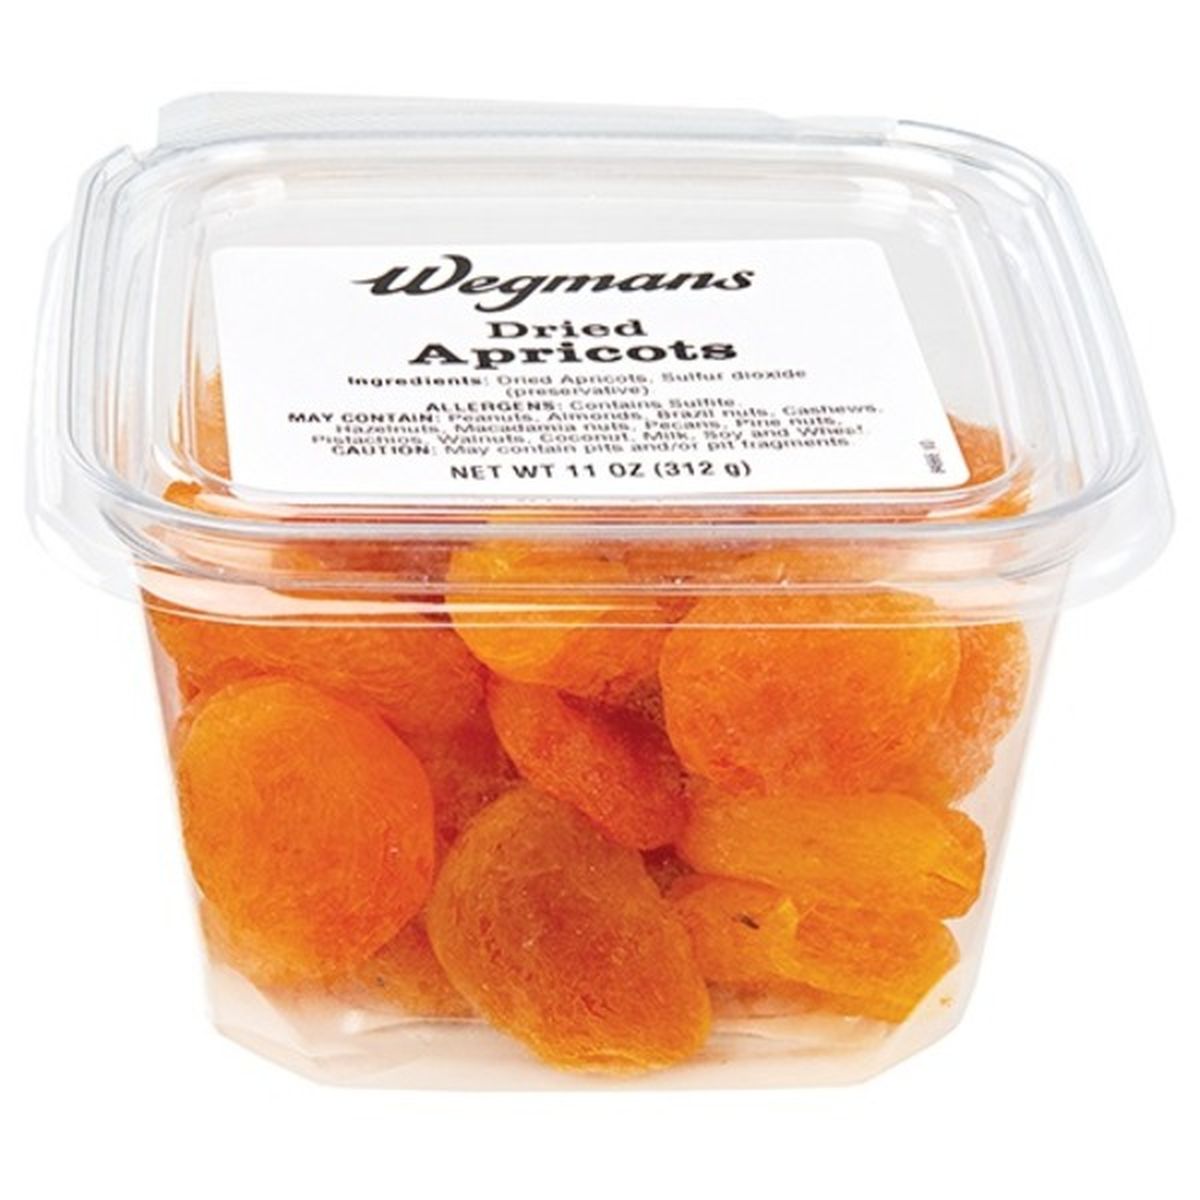 Calories in Wegmans Dried Apricots